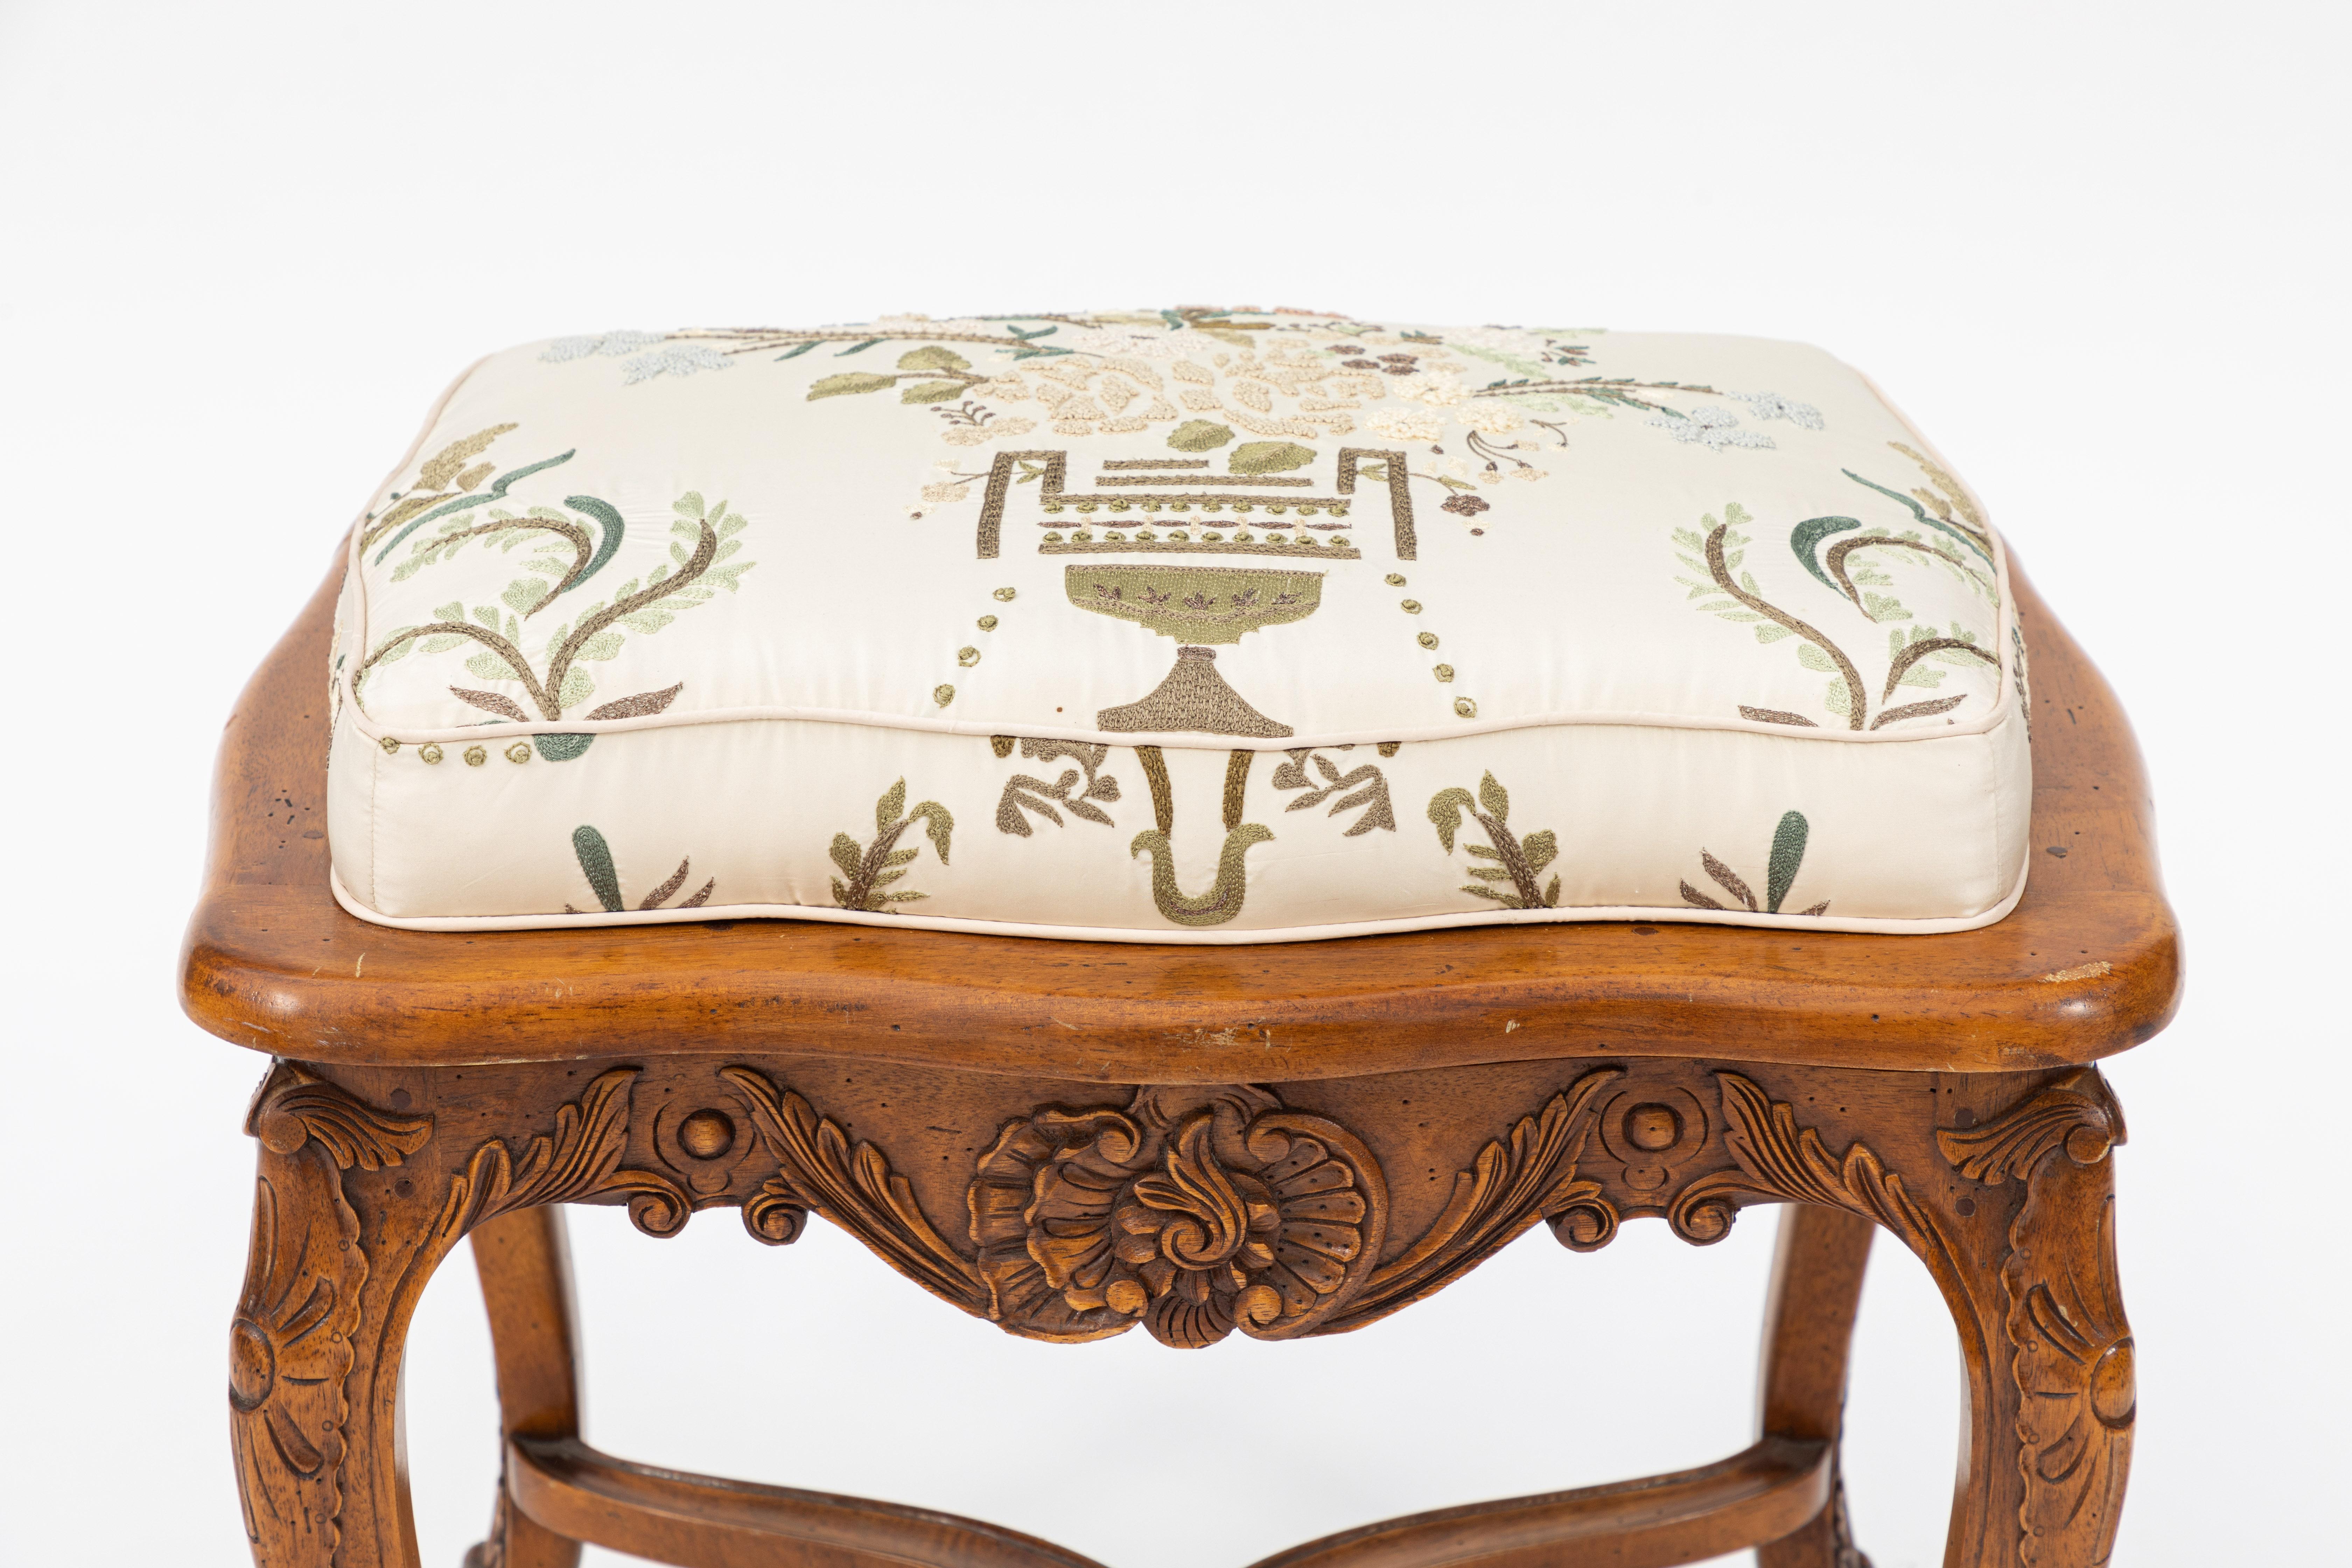 Vintage French provincial walnut bench upholstered in embroidered silk fabric in floral urn motif.